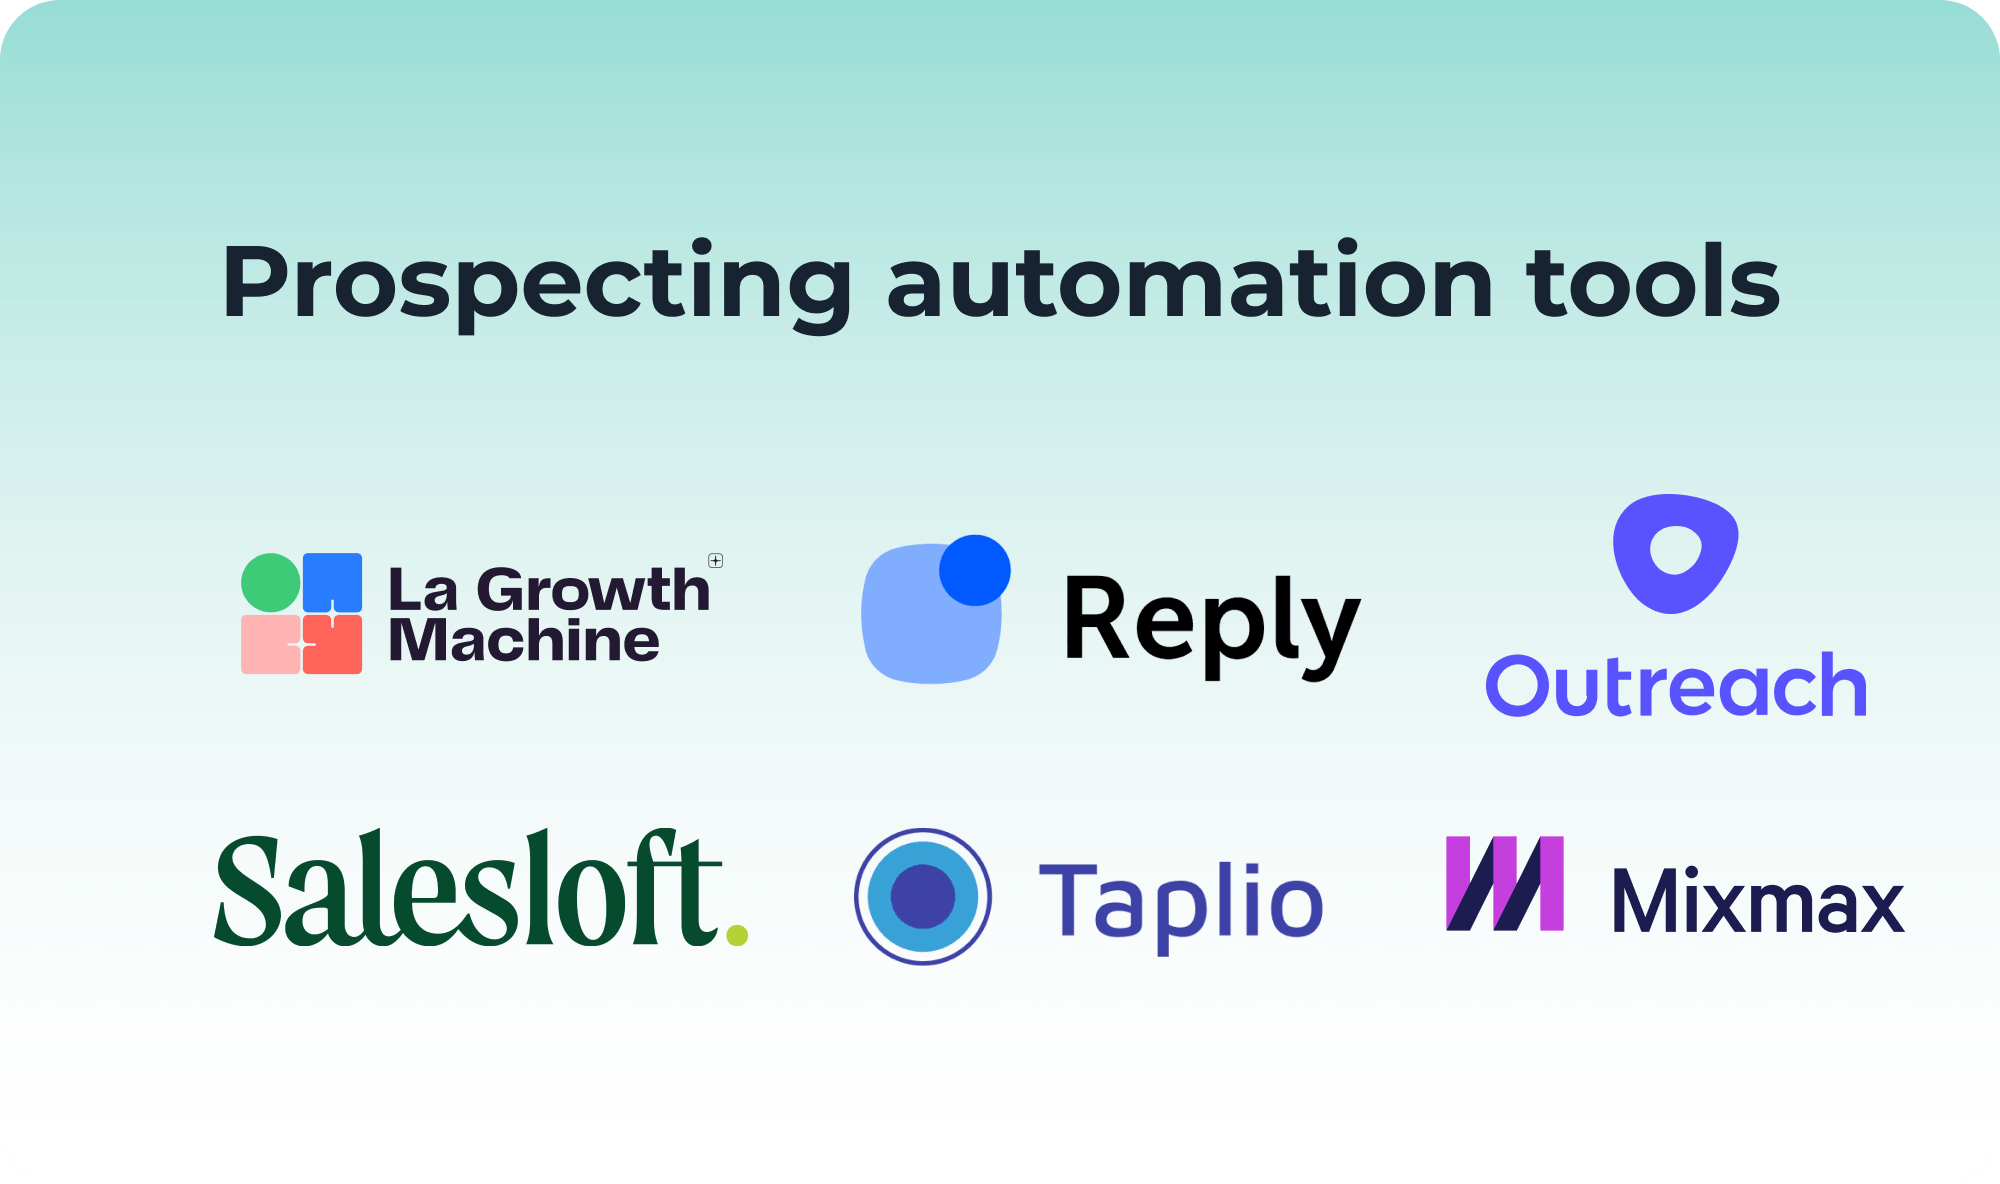 Prospecting automation tools